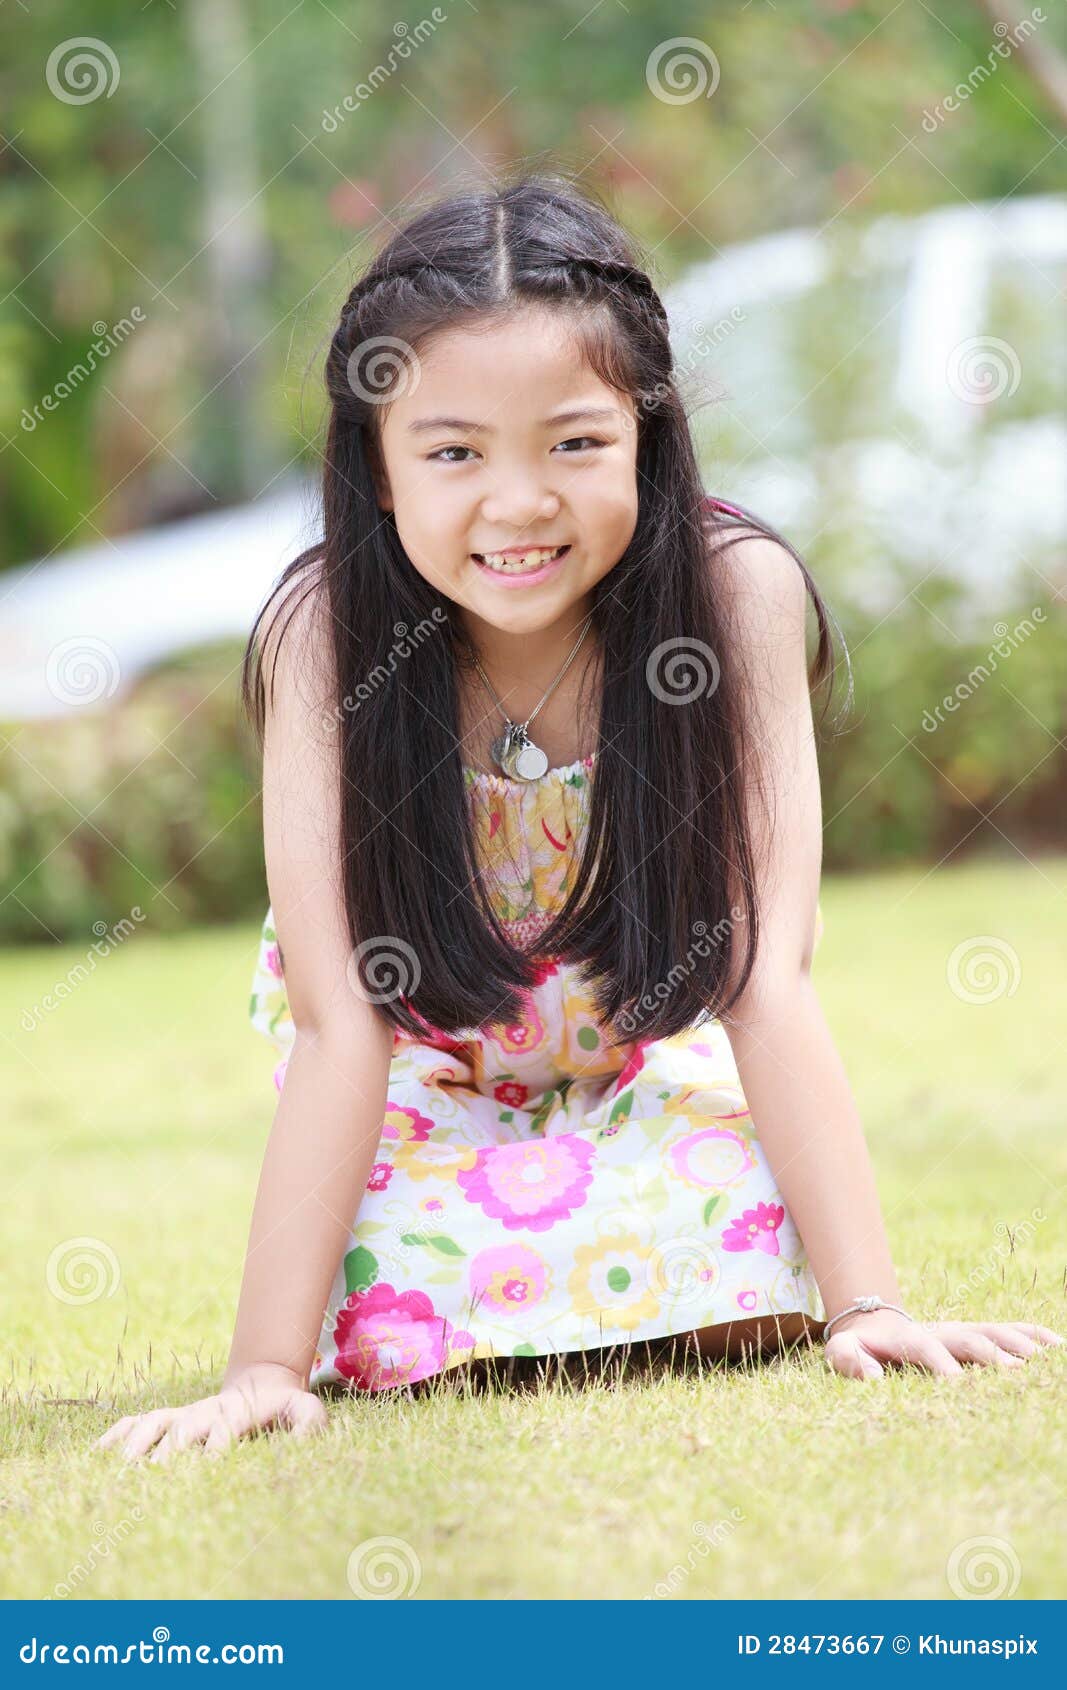 Face Of Asian Girl With Long Hair Sitting On Green Grass ...